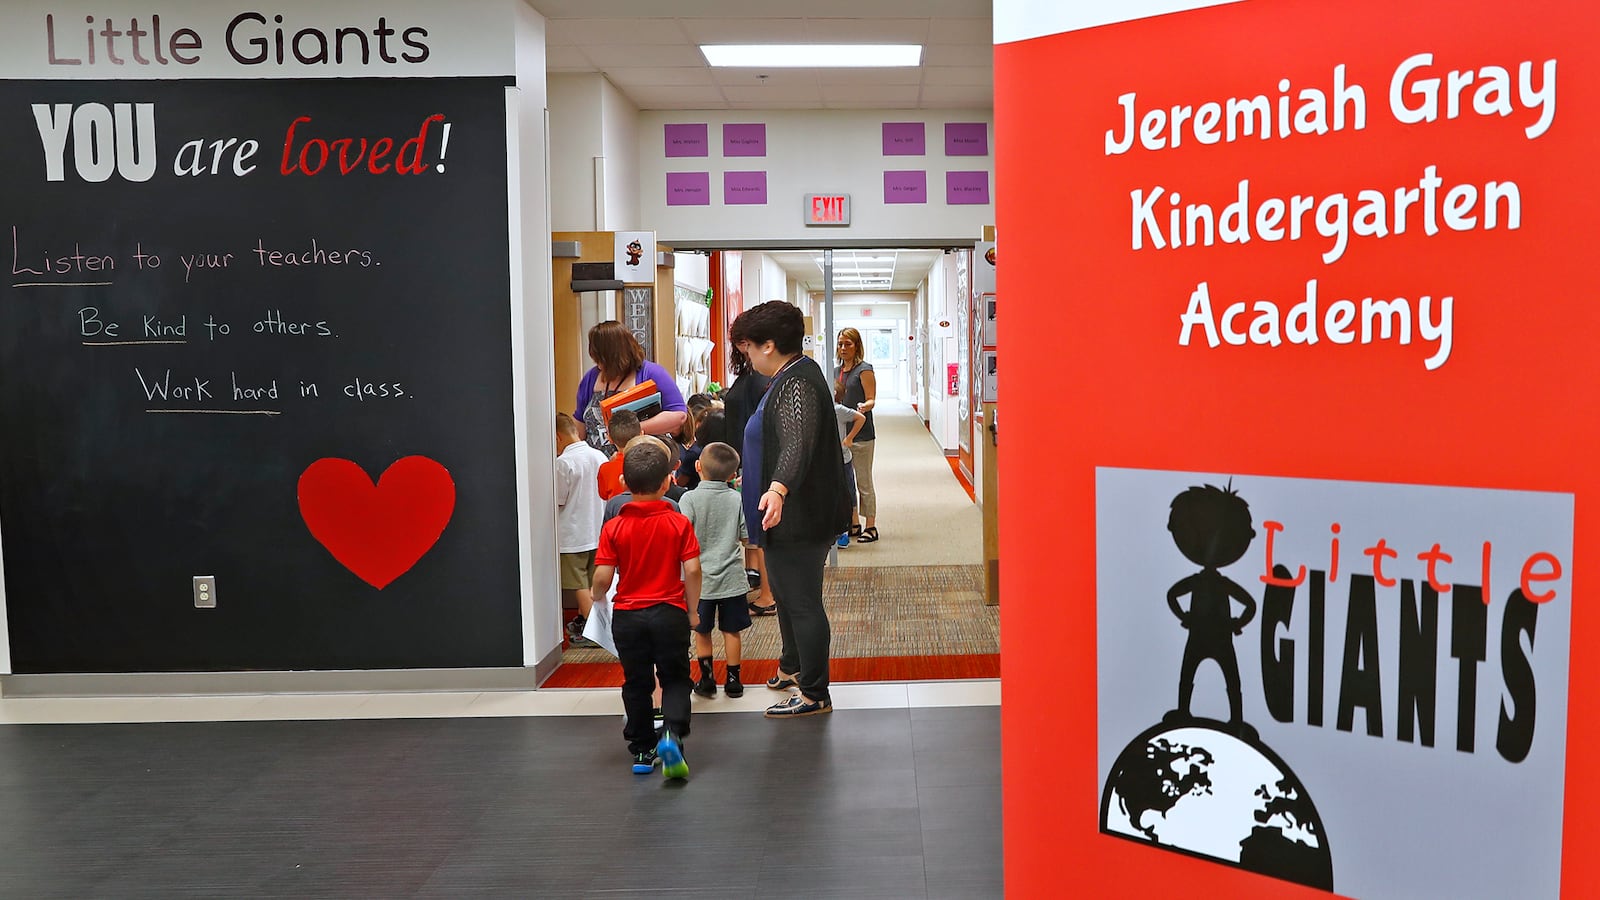 Positive messages greet students at Jeremiah Gray Kindergarten Academy, Friday, August 2, 2019.